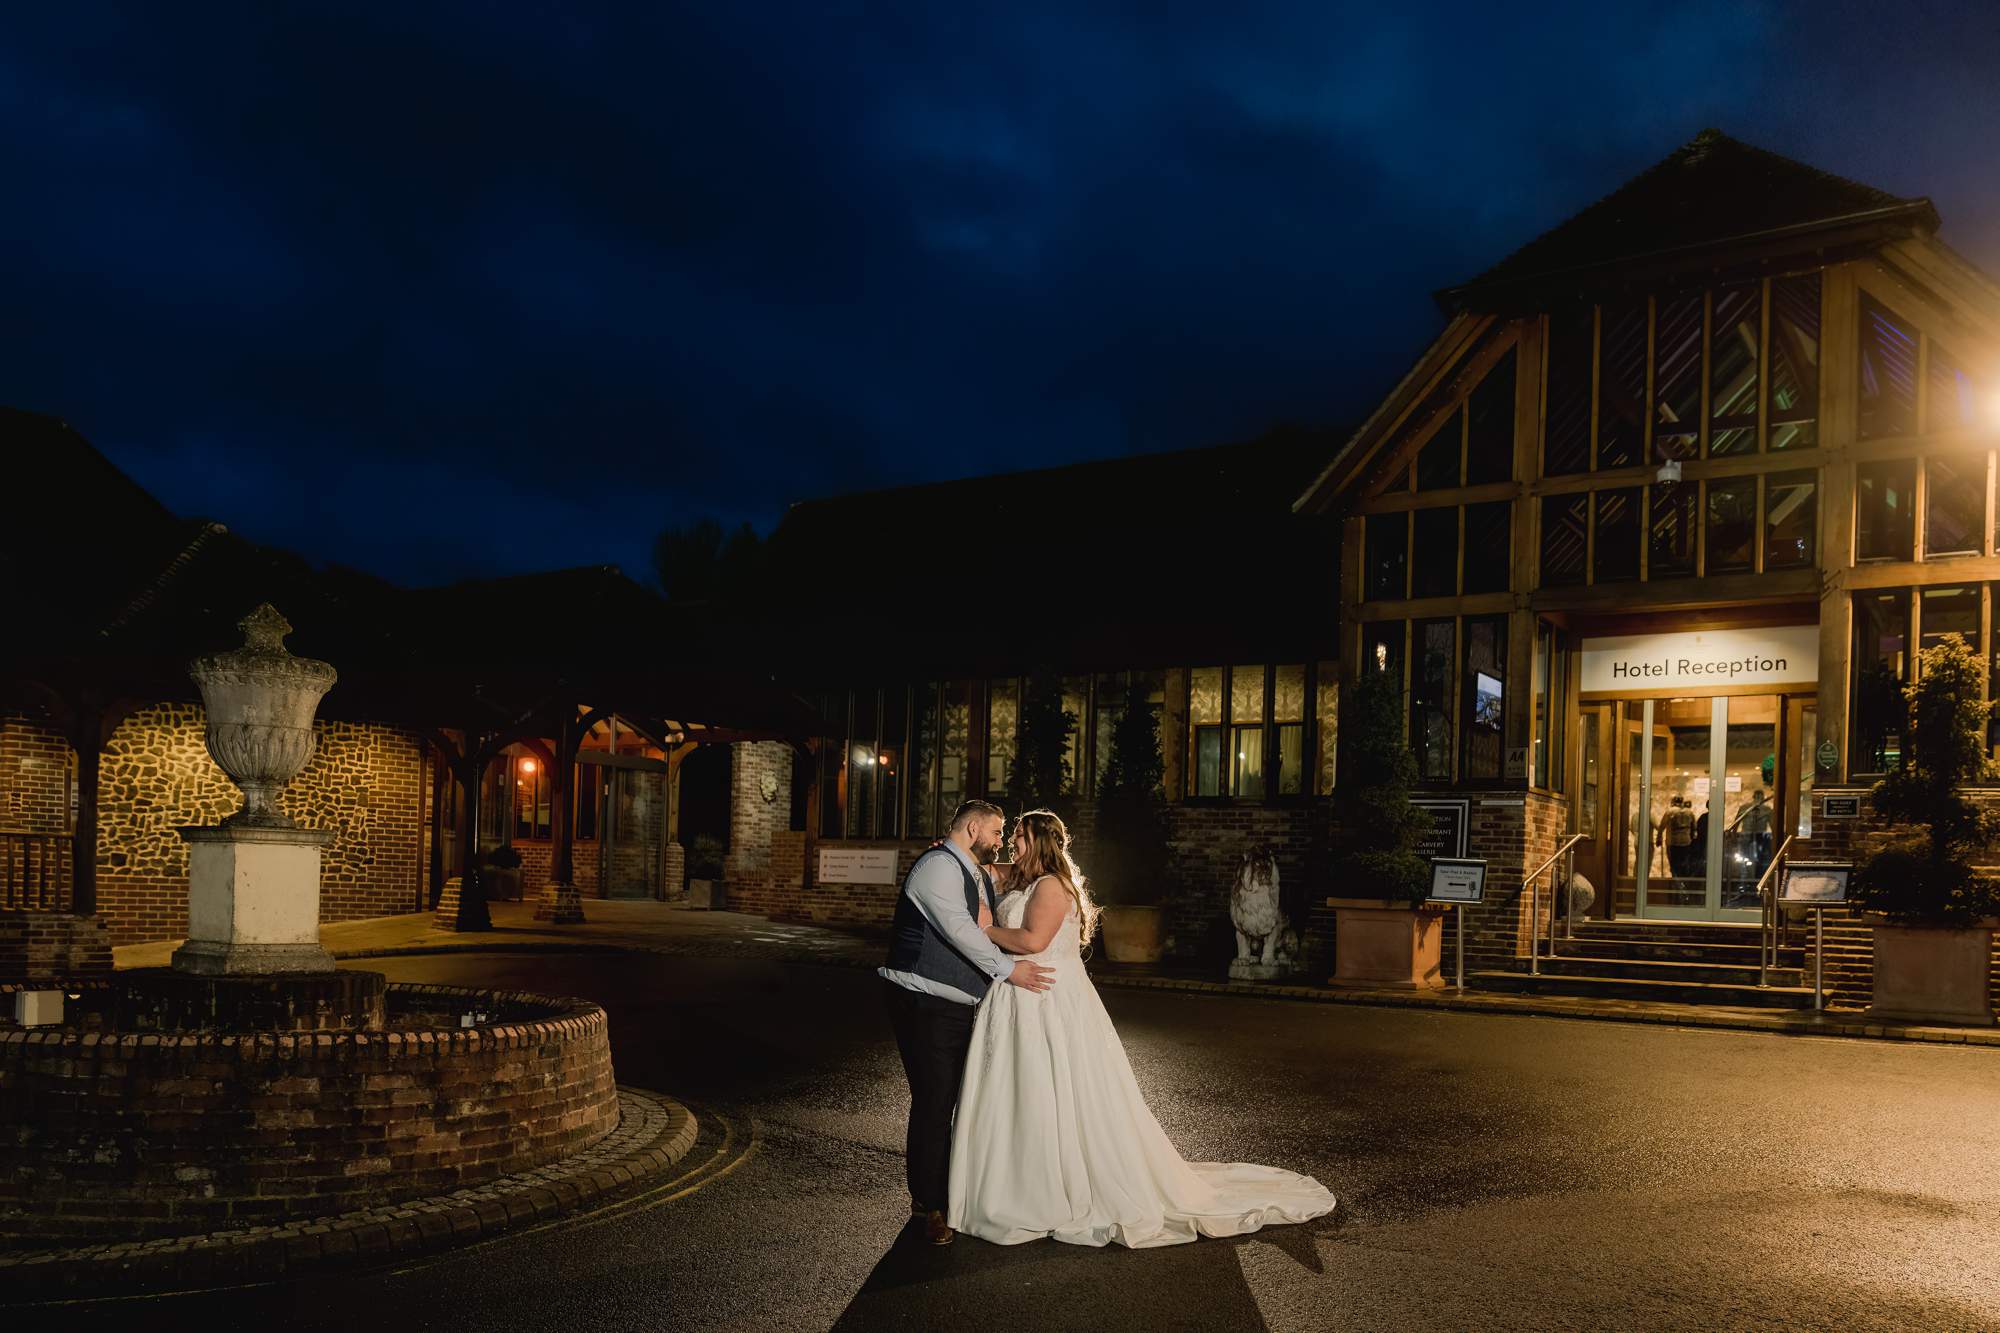 A couple under the twilight sky on their wedding day at Old Thorns Hotel in Hampshire.